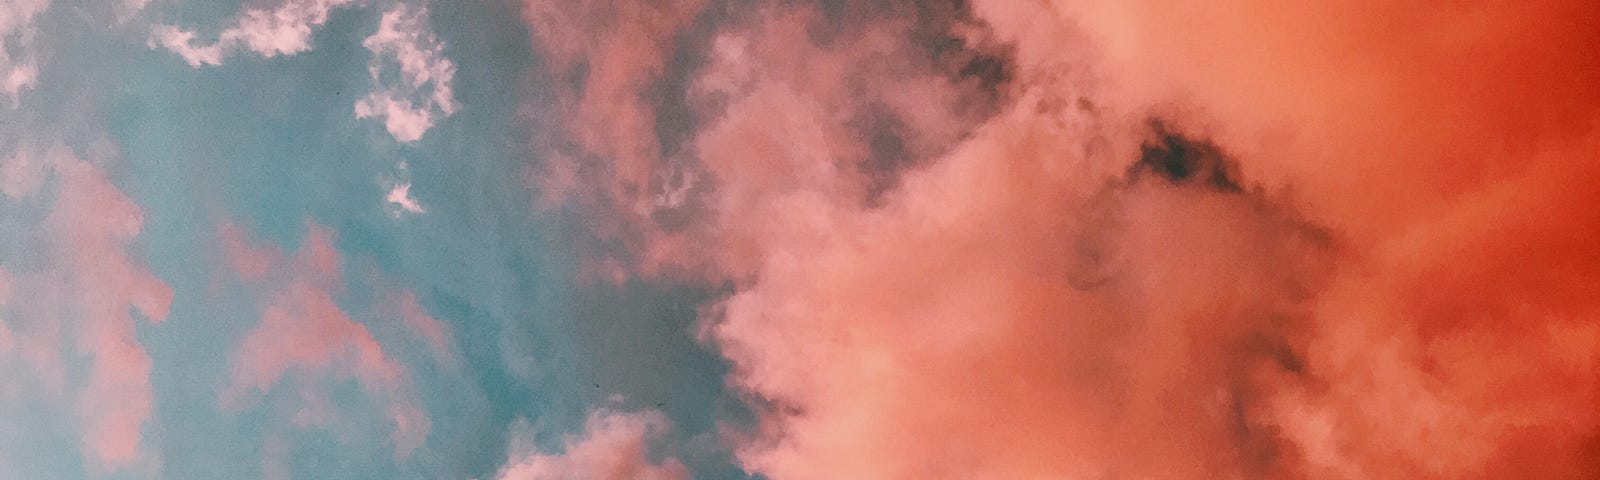 Pink fluffy clouds